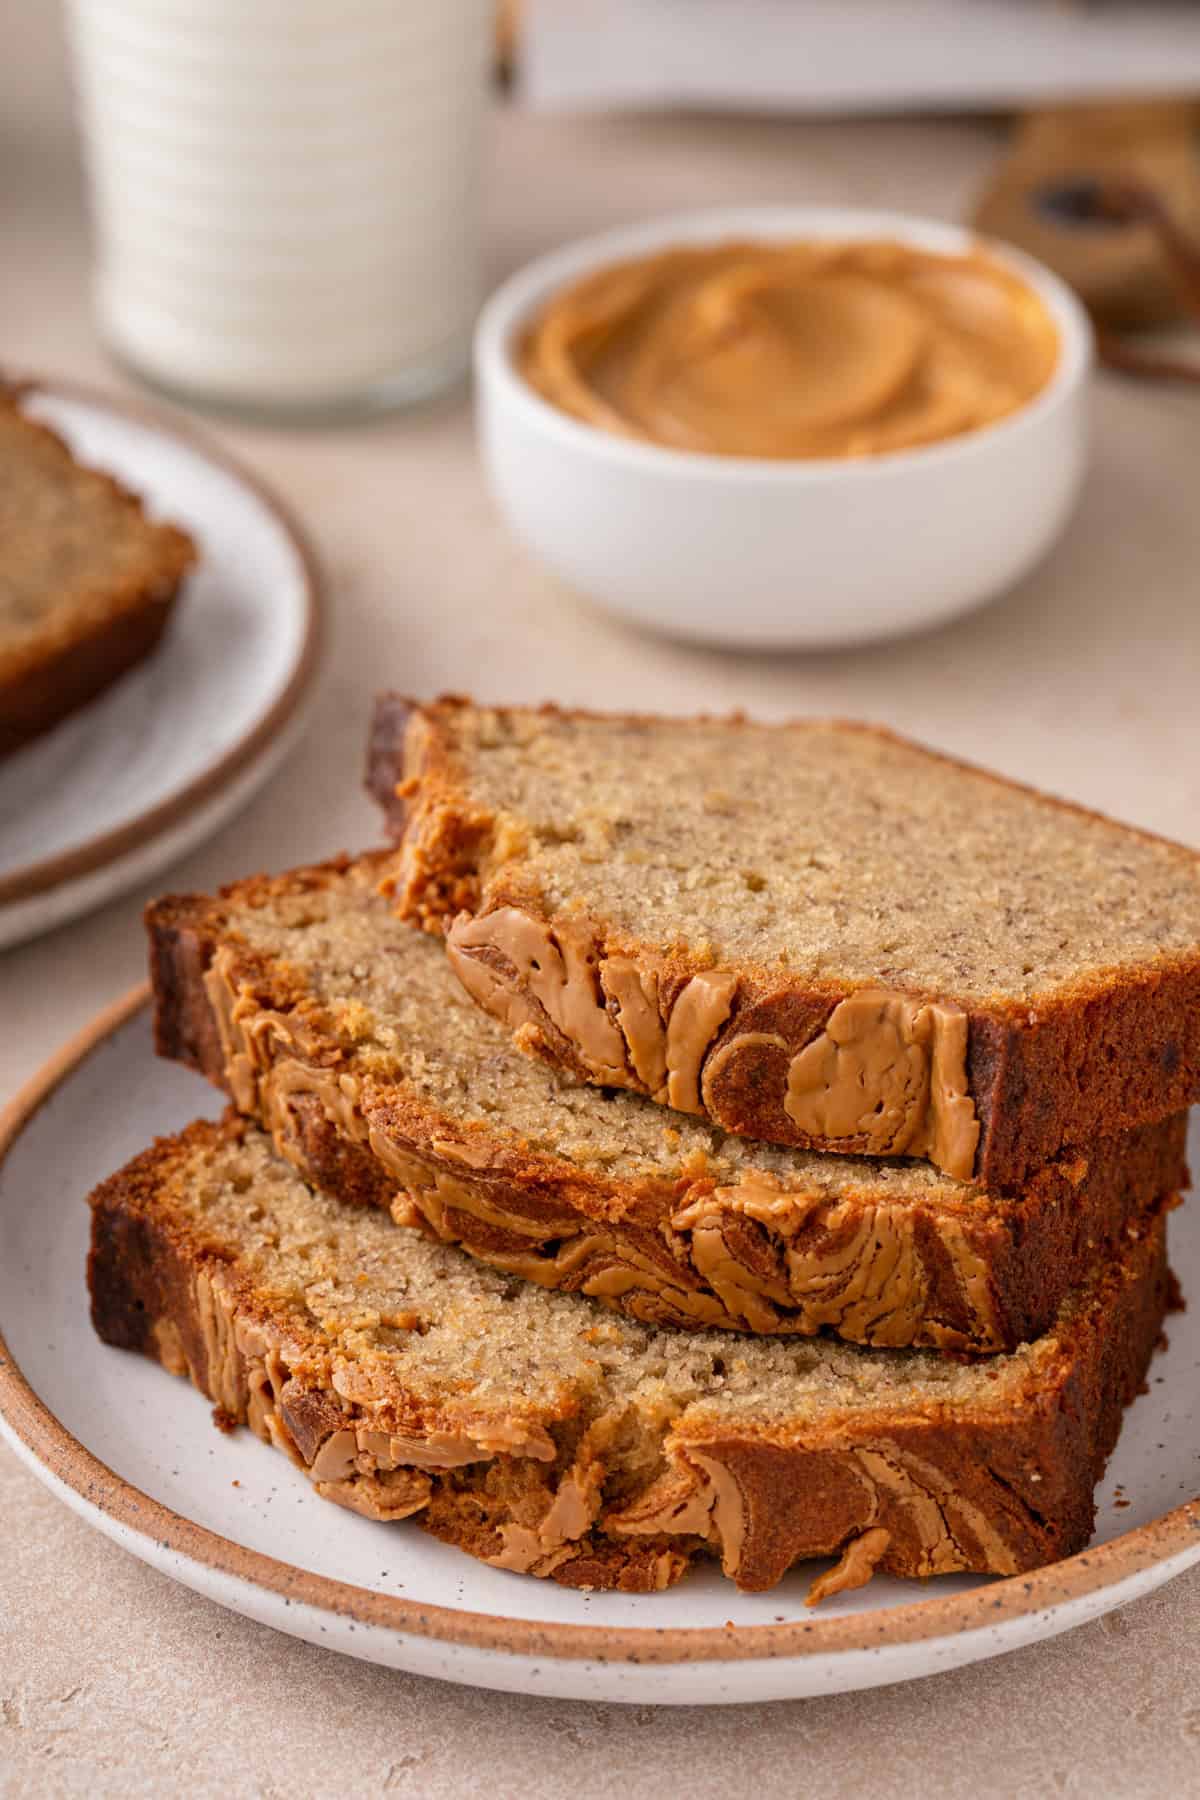 Three slices of peanut butter banana bread stacked on a plate.